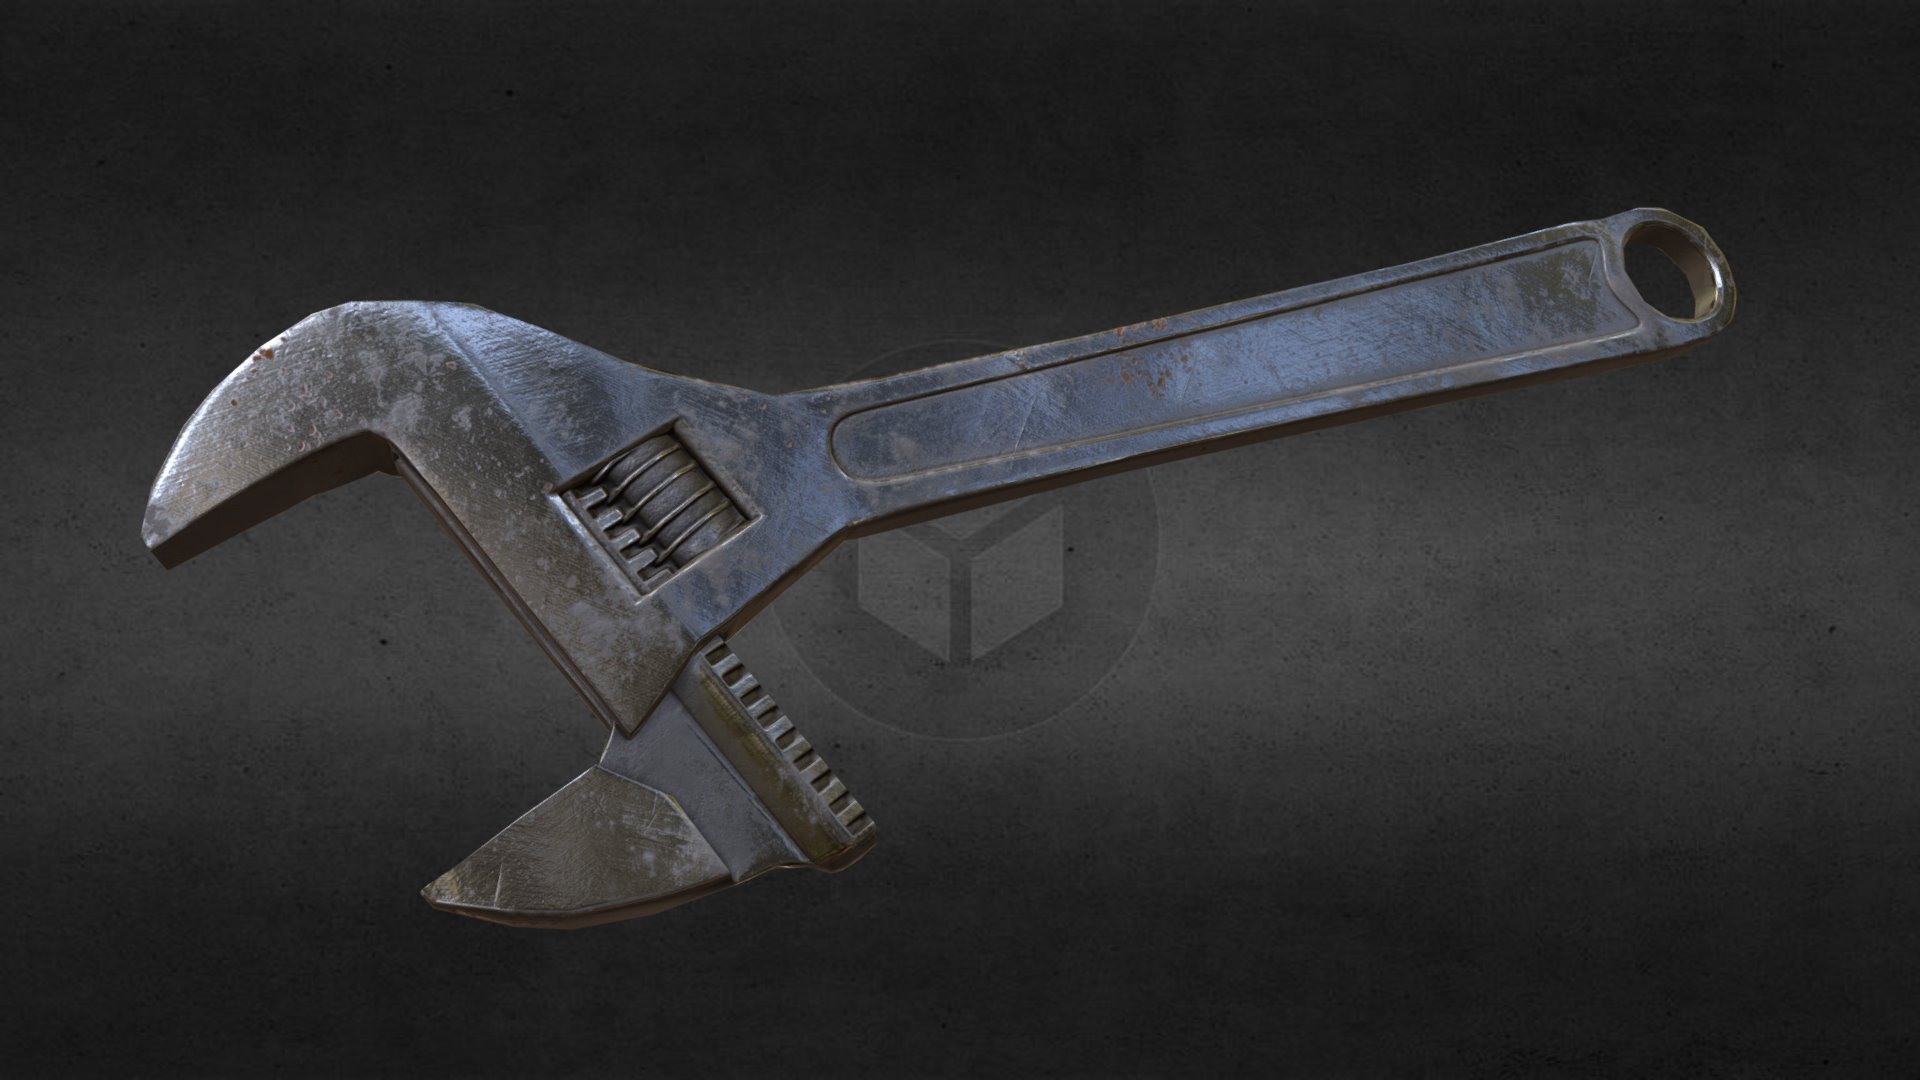 3D model spanner – real-time model - This is a 3D model of the spanner - real-time model. The 3D model is about a silver and gold knife.